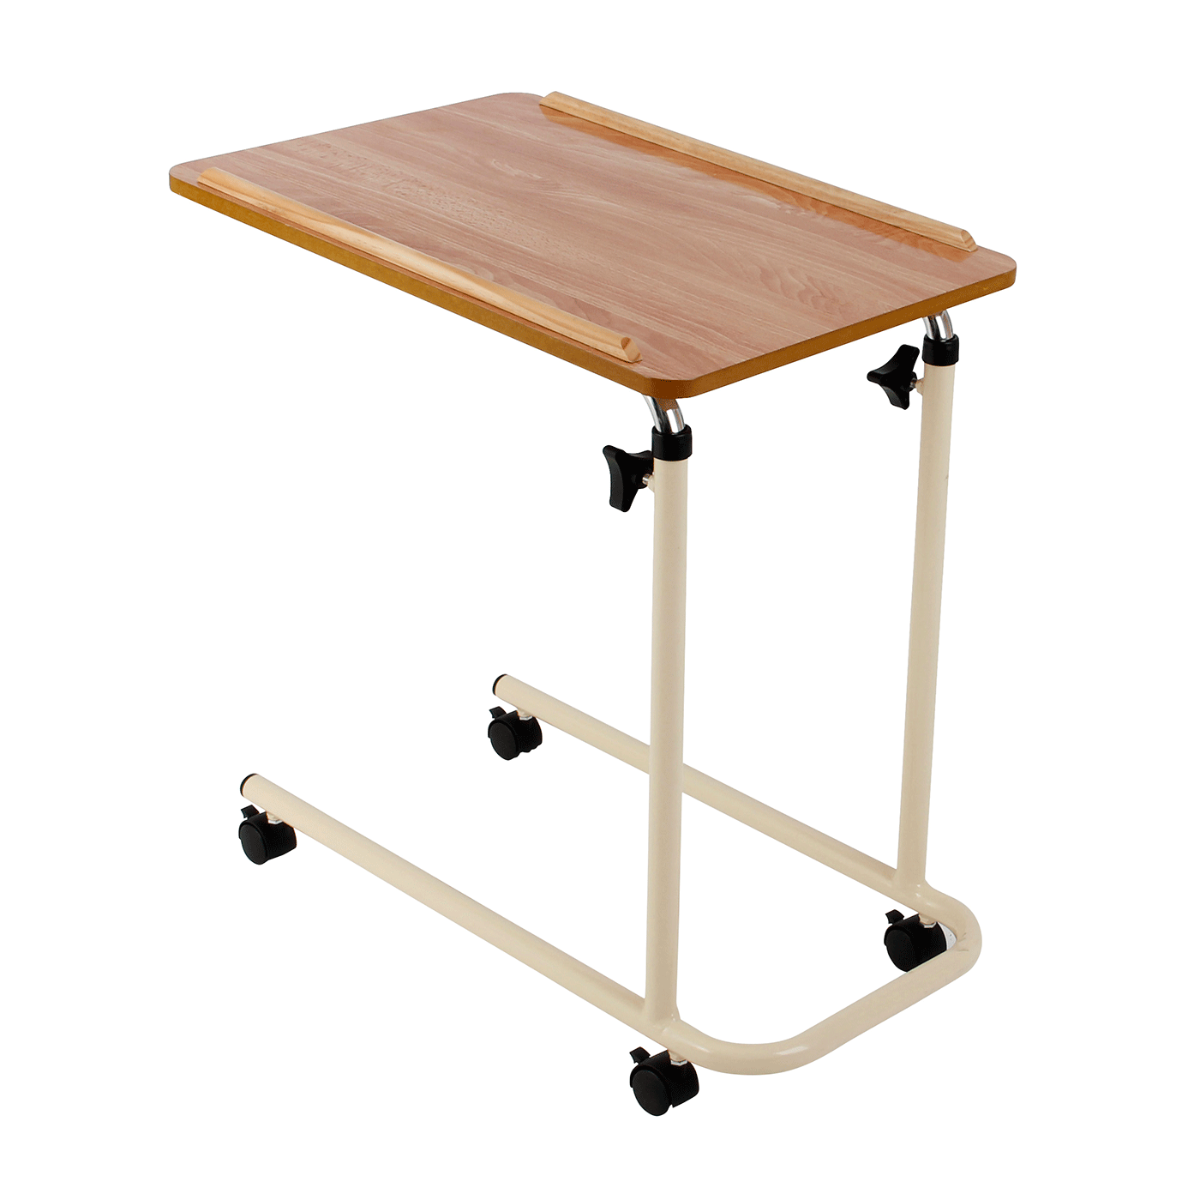 Homecraft Laminated Top Overbed Table with Castor - two tables